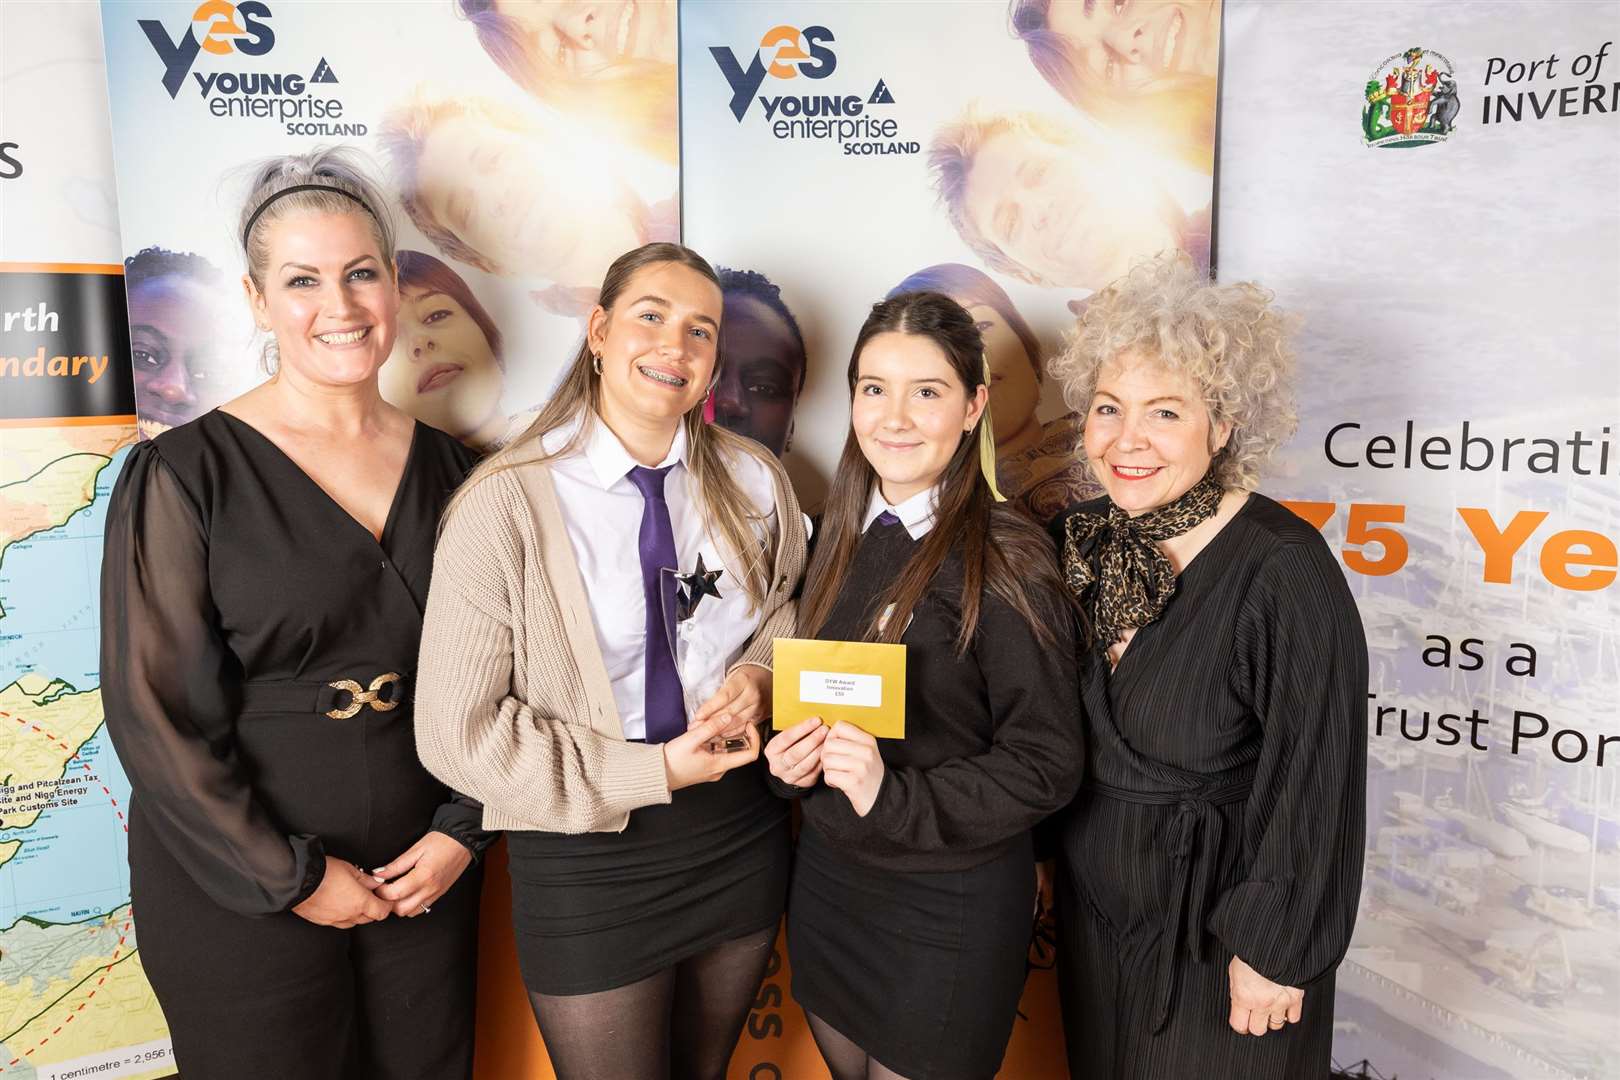 Culloden Academy (left to right): Kirsty Hunter from category sponsor DYW Inverness & Central Highlands, Lily Craig-Gould, Jessica Streeter-Smith, Nell Rodger from DYWICH.